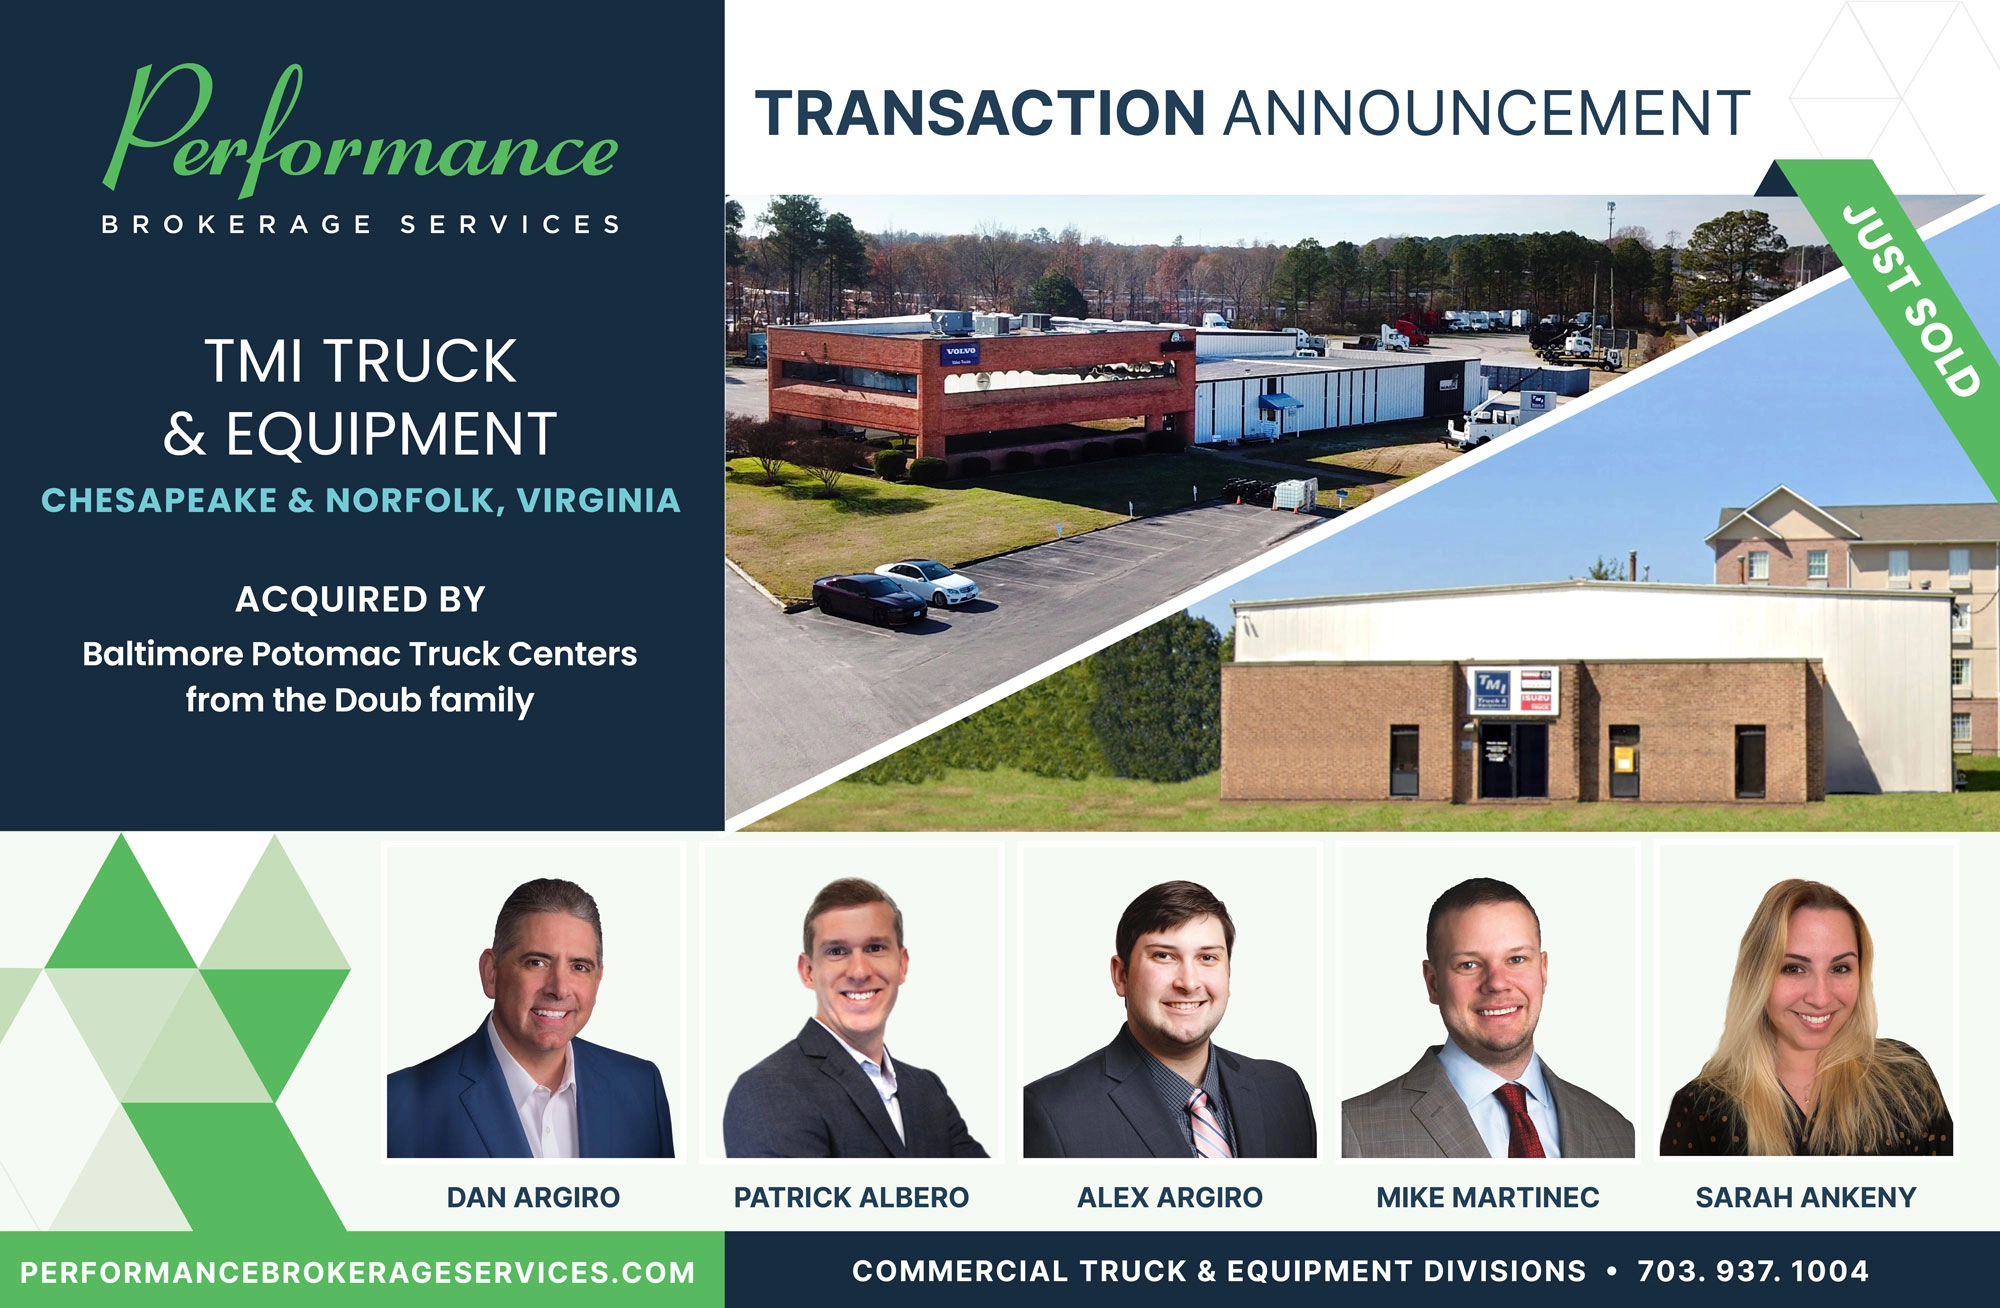 TMI Truck & Equipment sells to Baltimore Potomac Truck Centers with Performance Brokerage